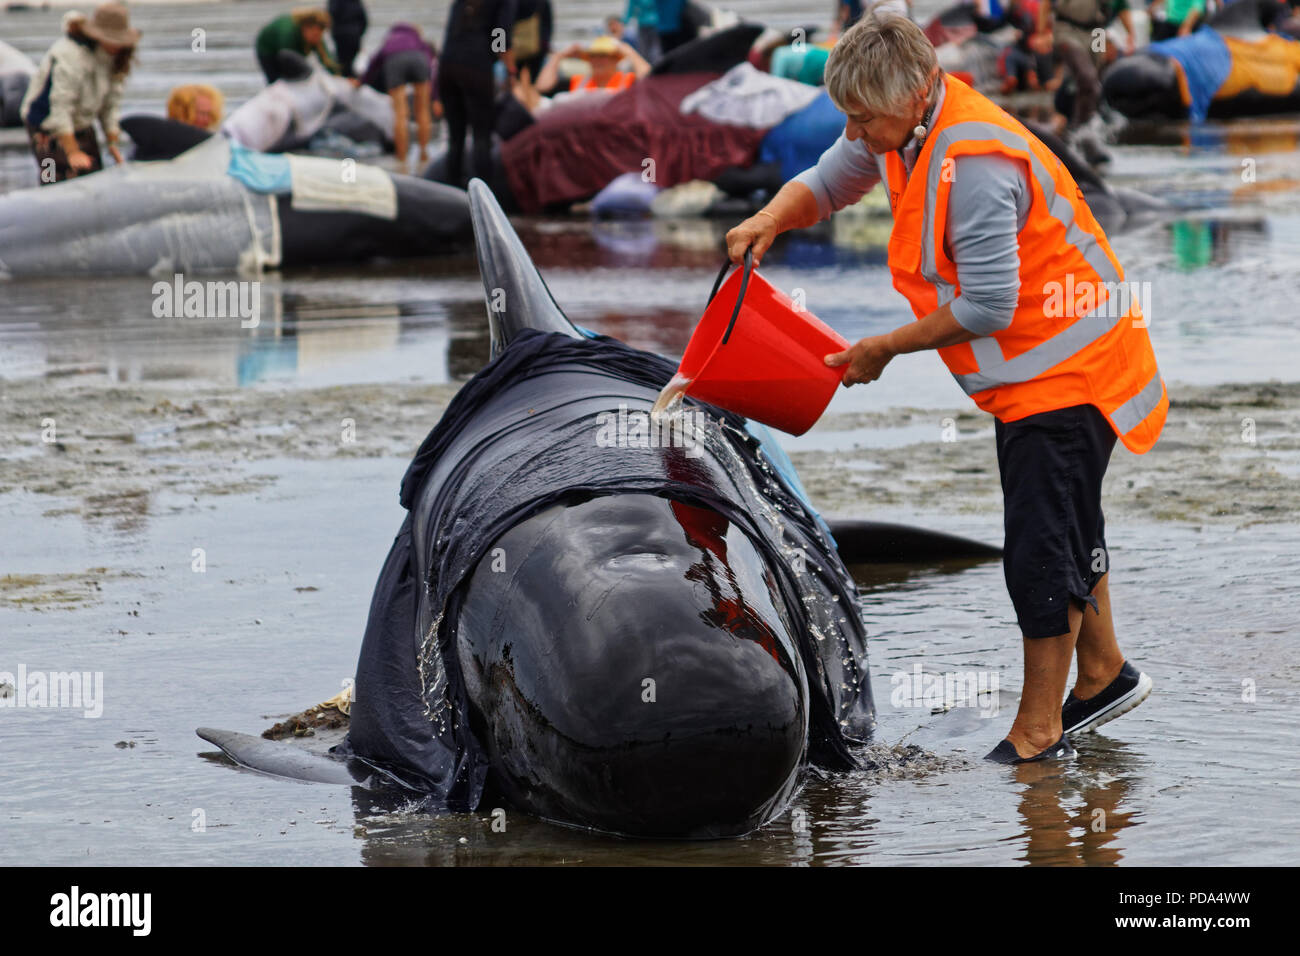 New Zealand, Farewell Spit, whale stranding, animal, whale, sea, water, fin, emotional, coast, cetacean, sad, stranded, sea mammal, died, open, sandy  Stock Photo